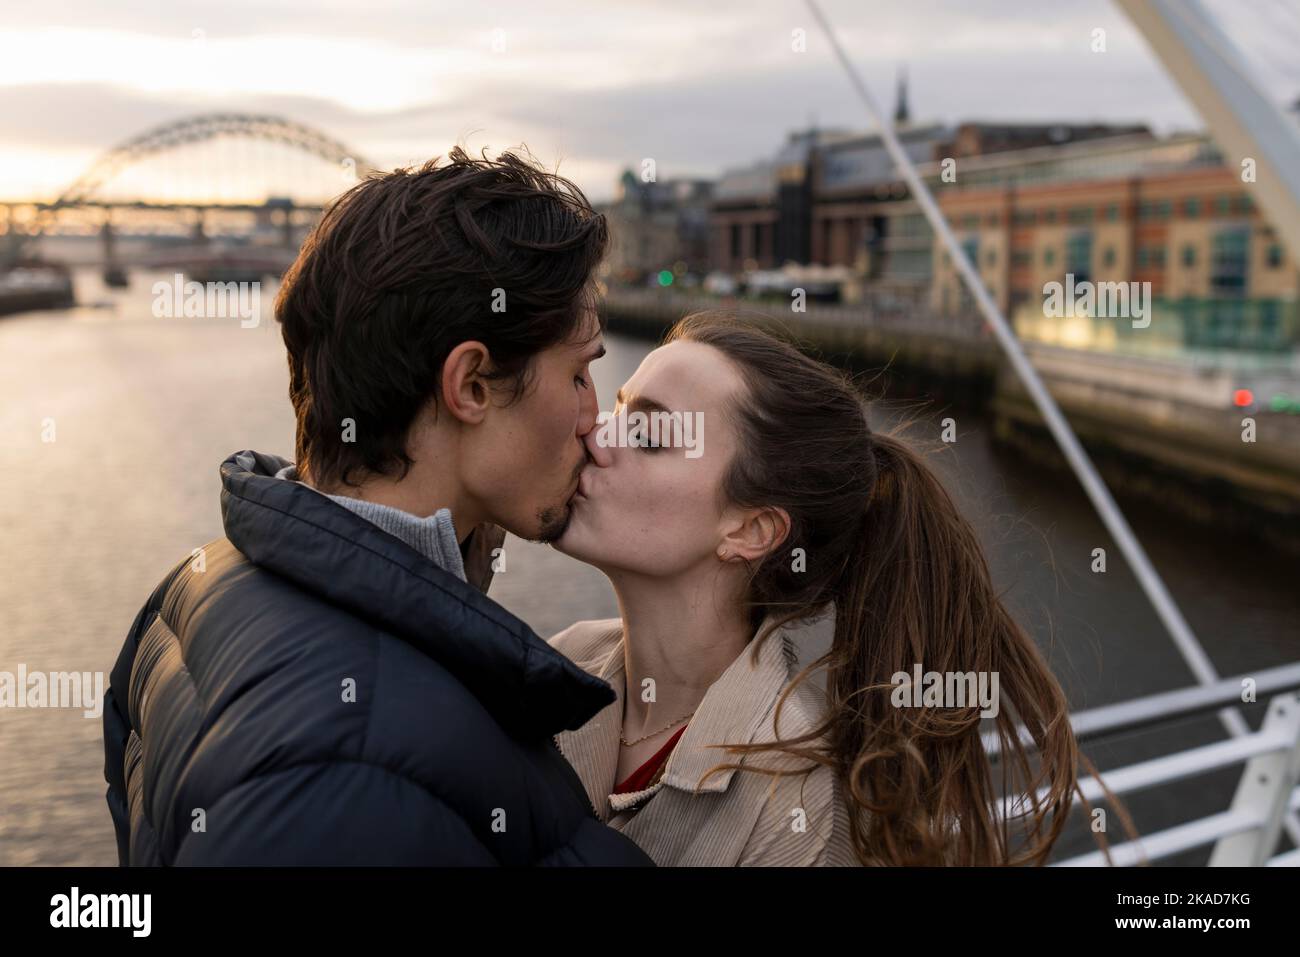 A close-up shot of a young couple standing side by side sharing a kiss together on a bridge in the city, they are in love. Stock Photo